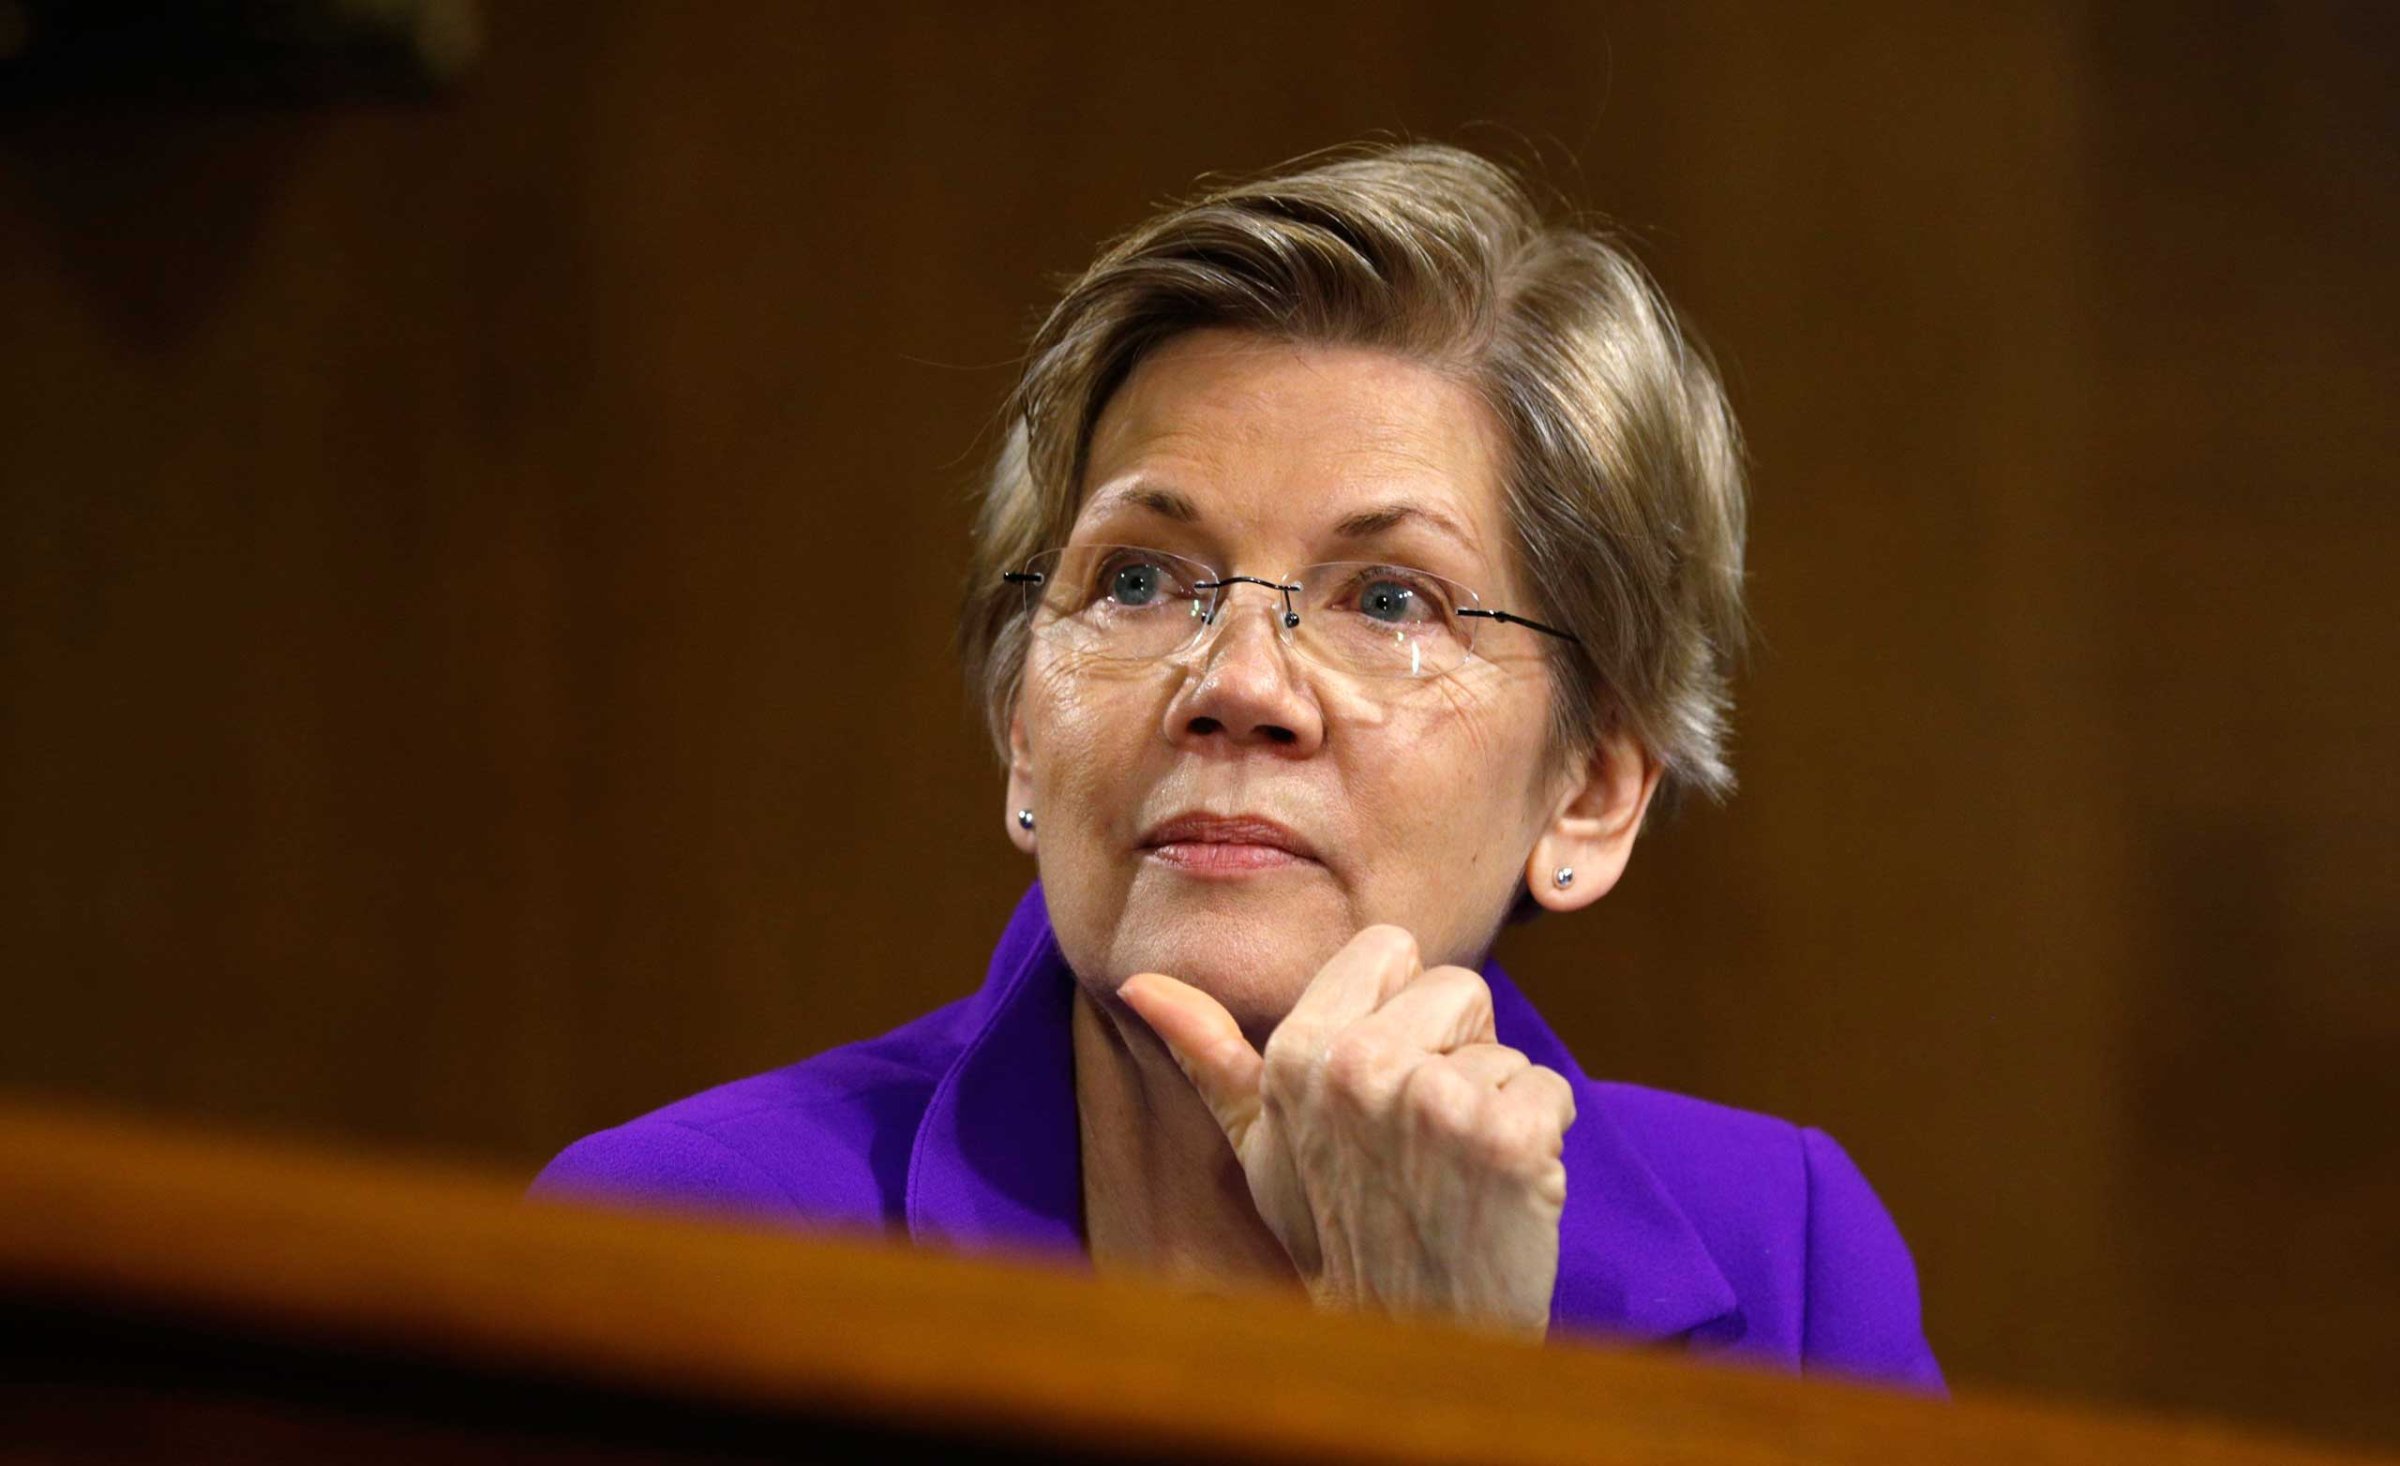 Sen. Elizabeth Warren listens to Federal Reserve Chair Janet Yellen testify, at a Senate Banking, Housing and Urban Affairs Committee hearing on "Semiannual Monetary Policy Report to Congress" on Capitol Hill in Washington, Feb. 24, 2015.